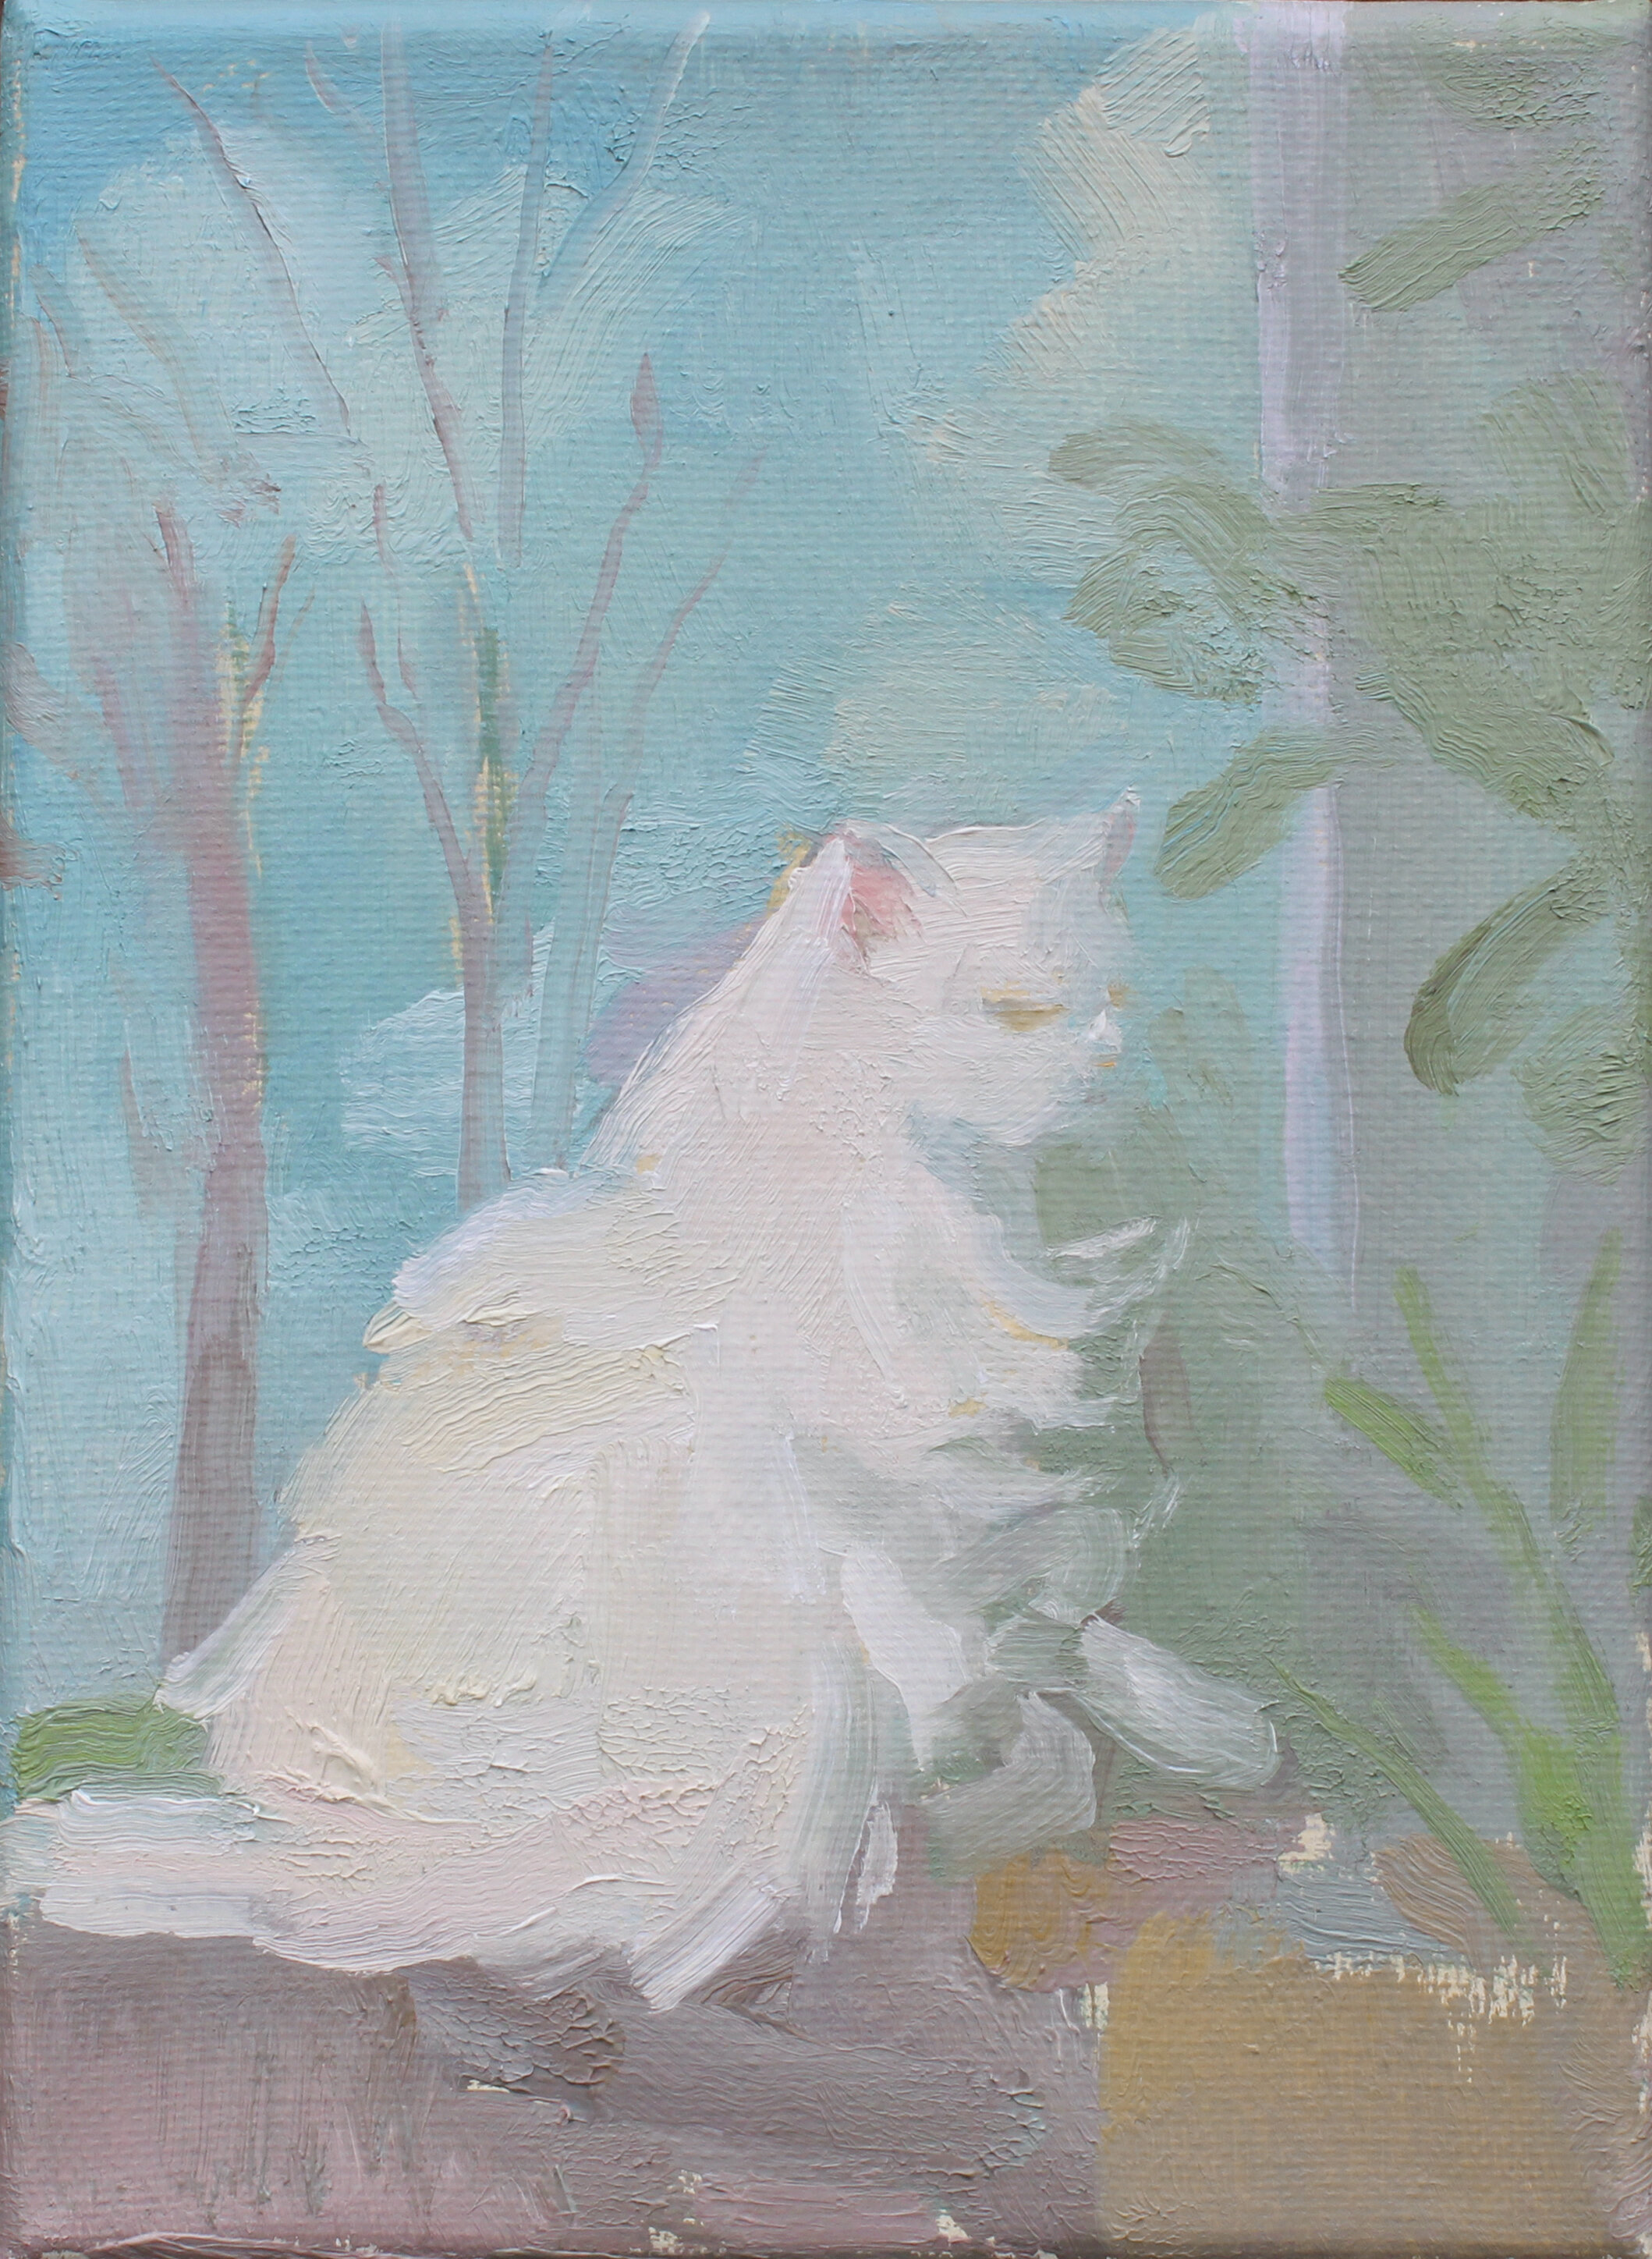    White Cat in Spring   oil on canvas 5 x 7” 2020   purchase  